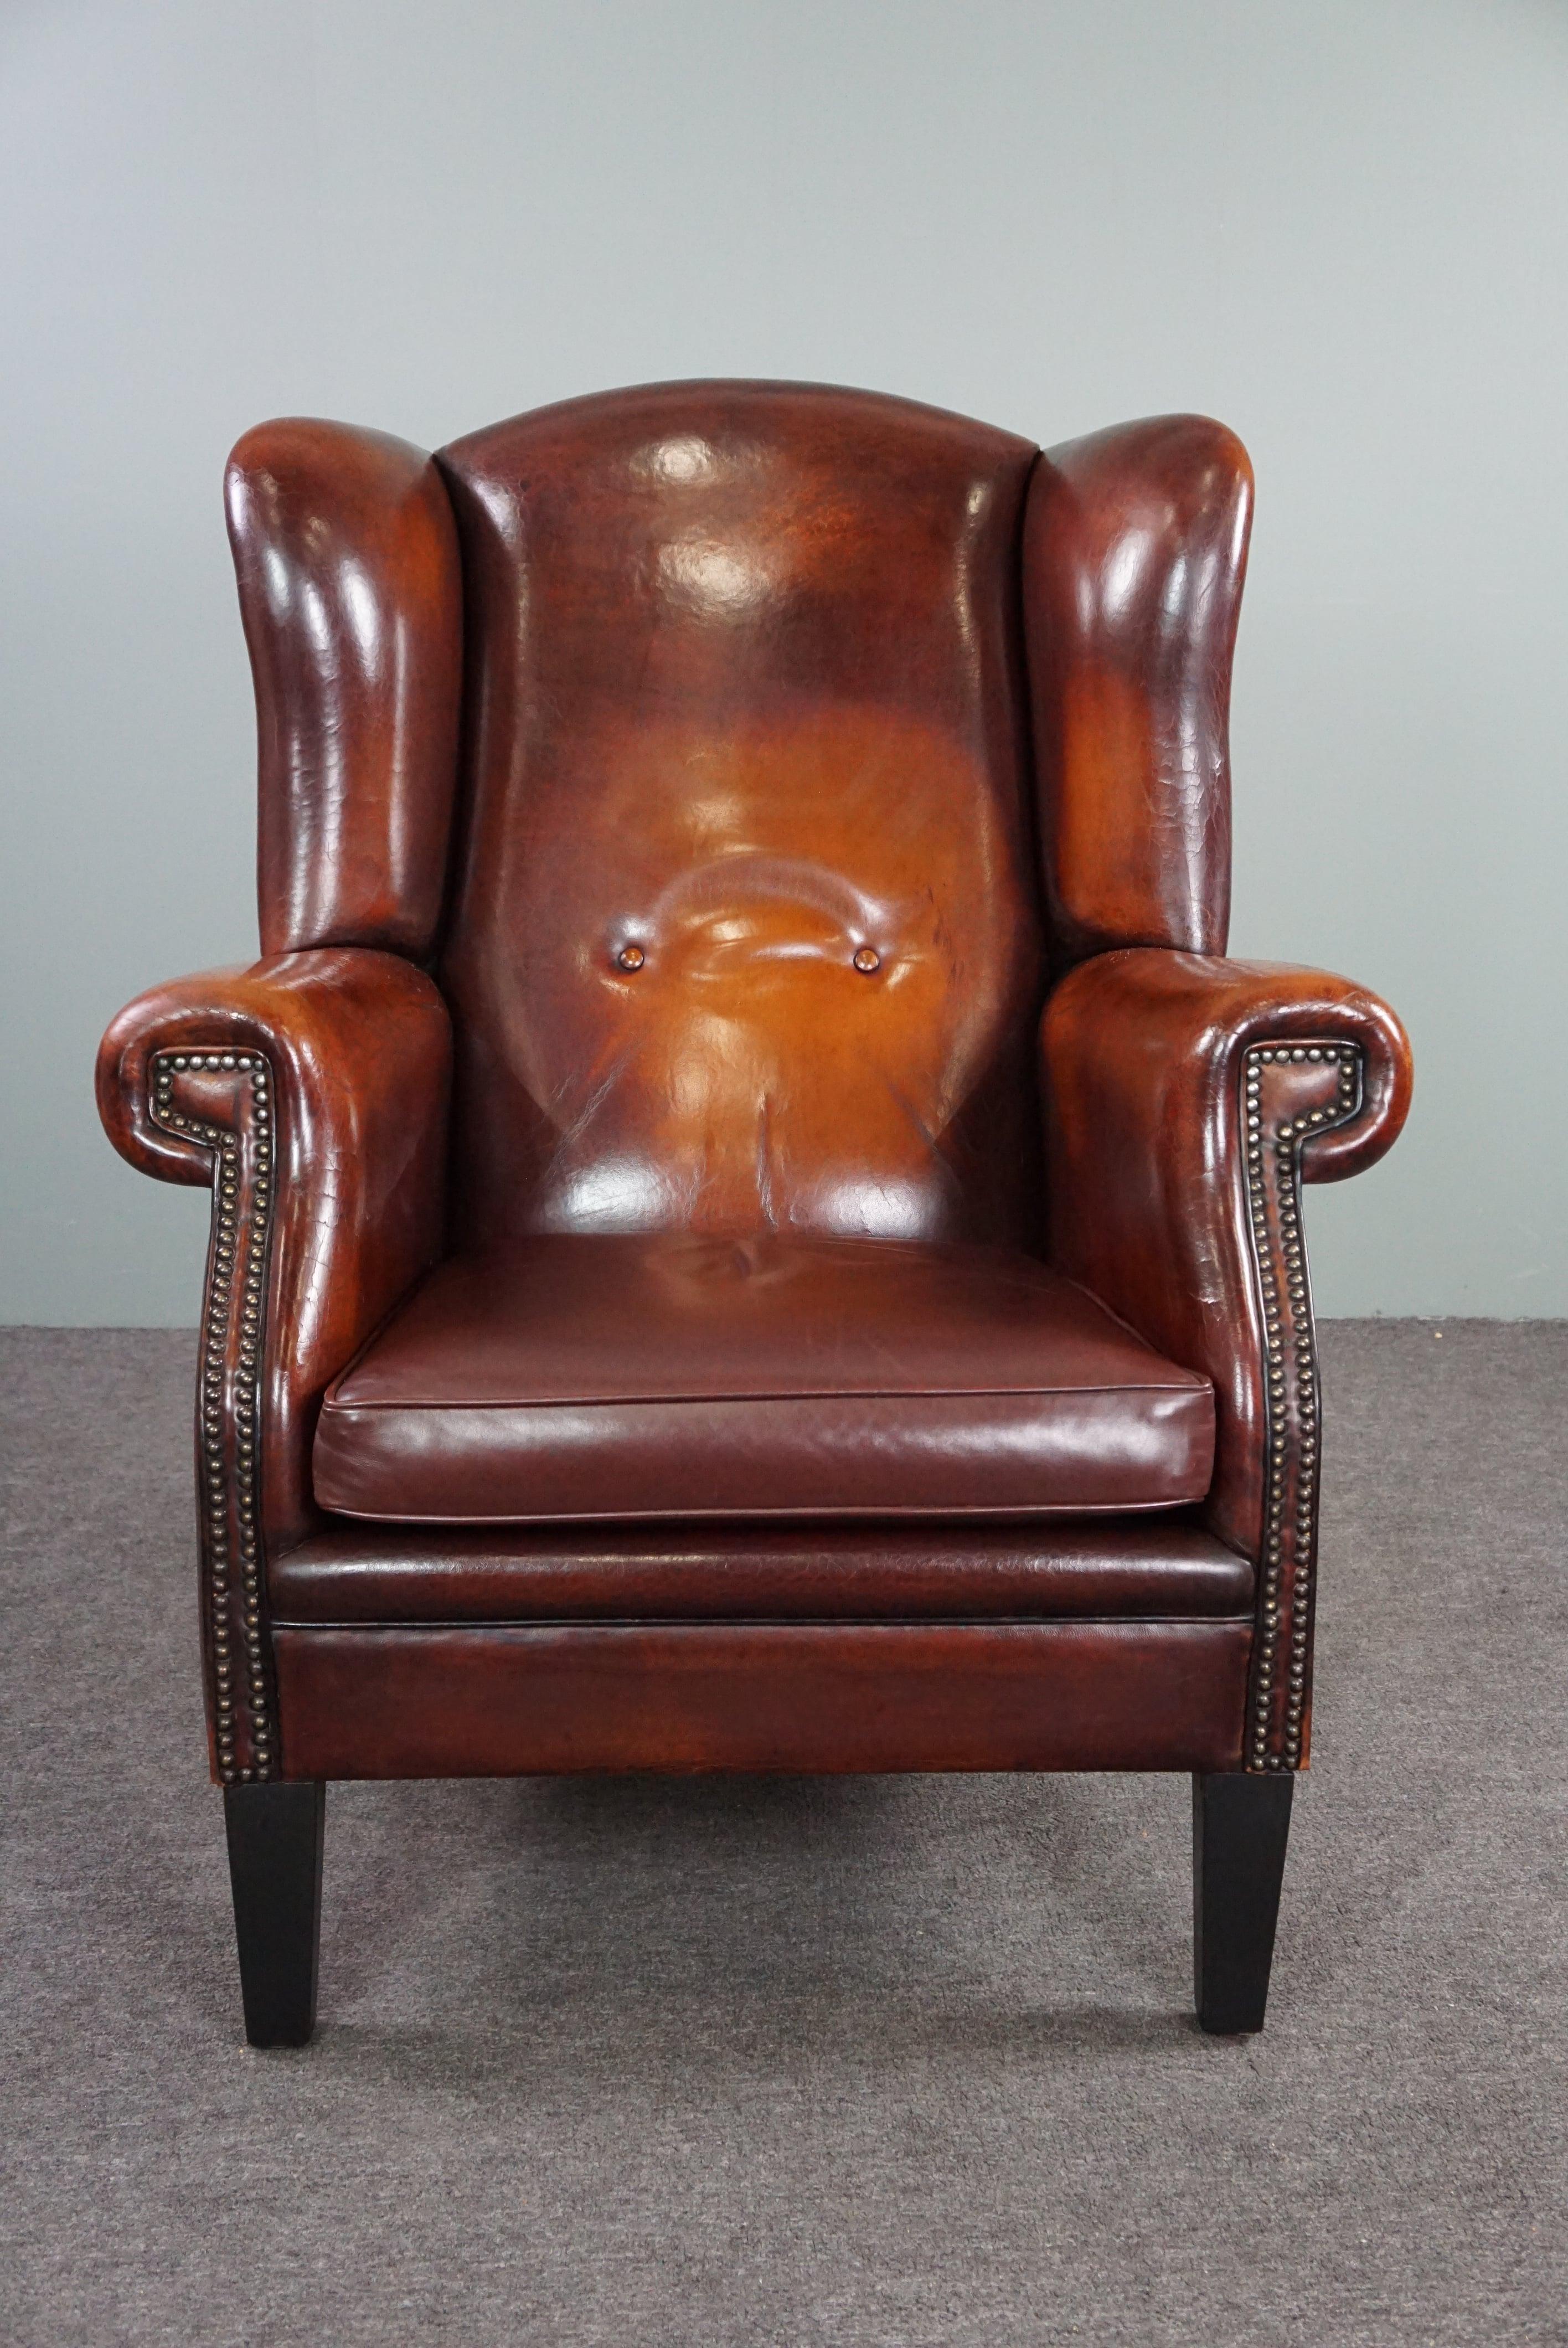 Offered is this beautiful, well-fitting sheepskin leather wing chair.
This sheep leather wing chair has a beautiful deep and warm color, an expressive patina, a comfortable seat, beautiful finish with decorative nails and stands on slender, sleek